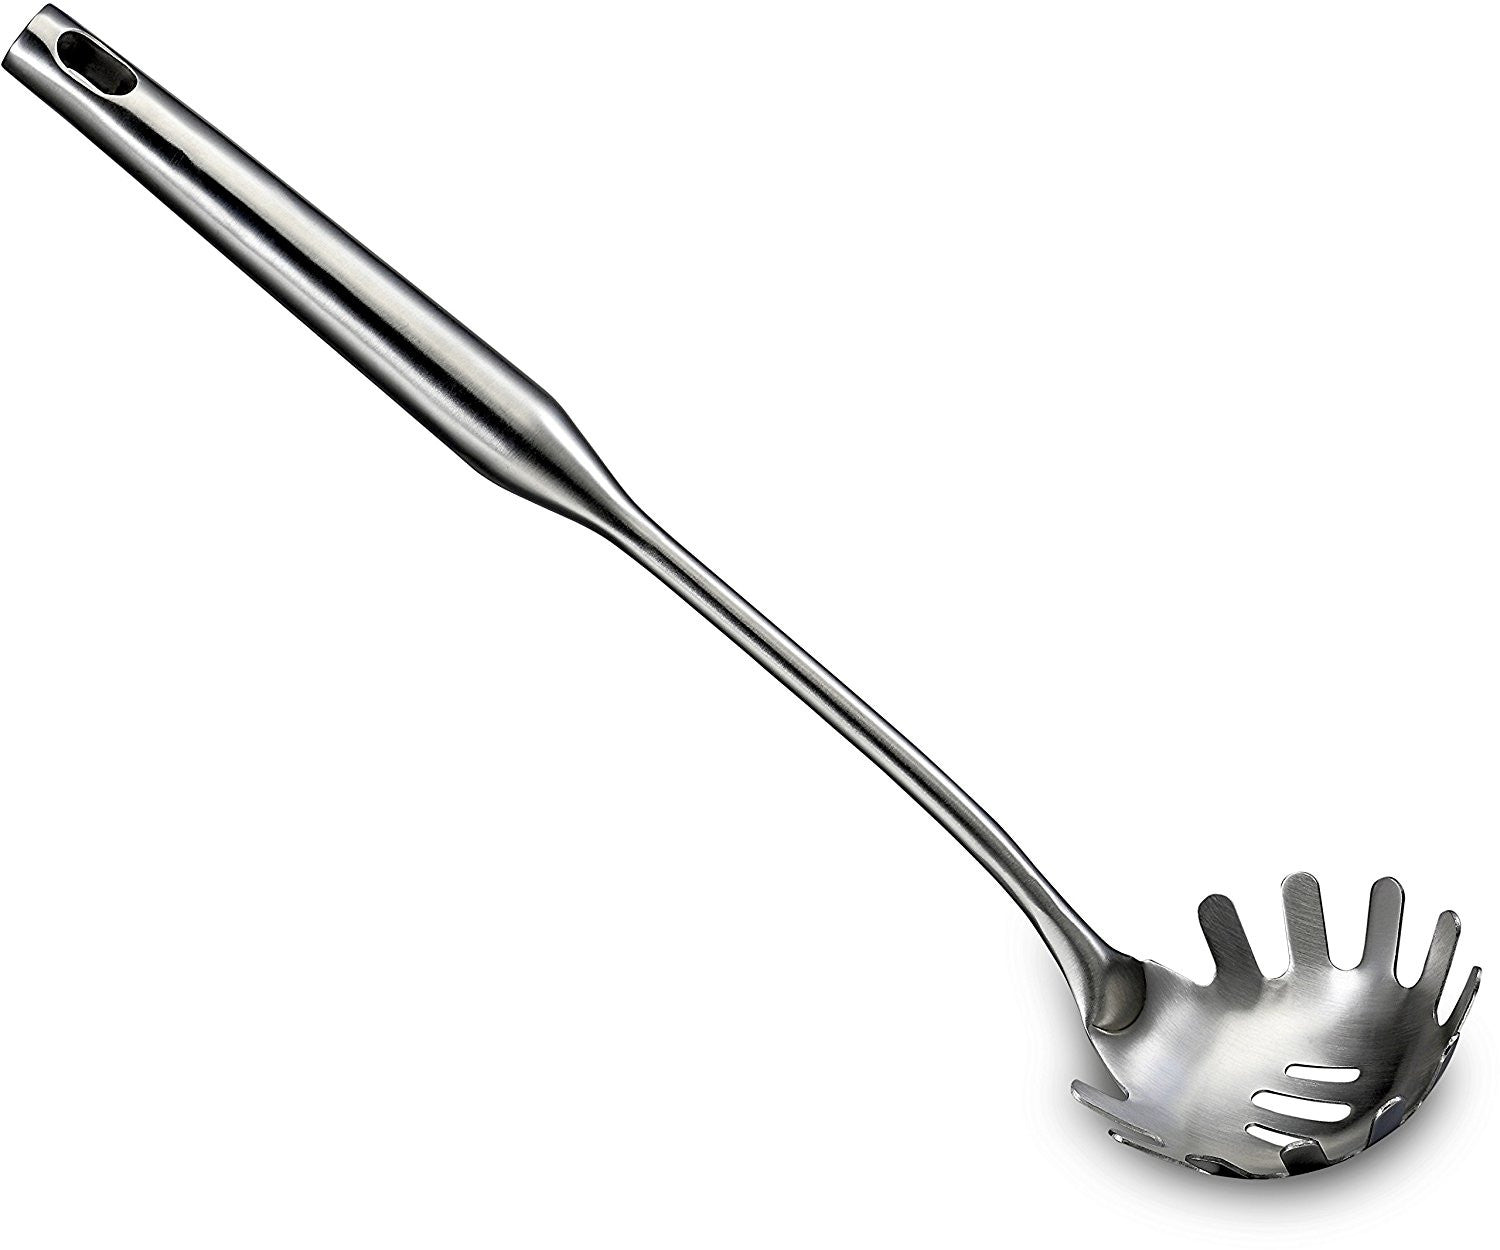 Spaghetti Spoon Pasta Forks - Serving Spoon Drains Serves Noodles